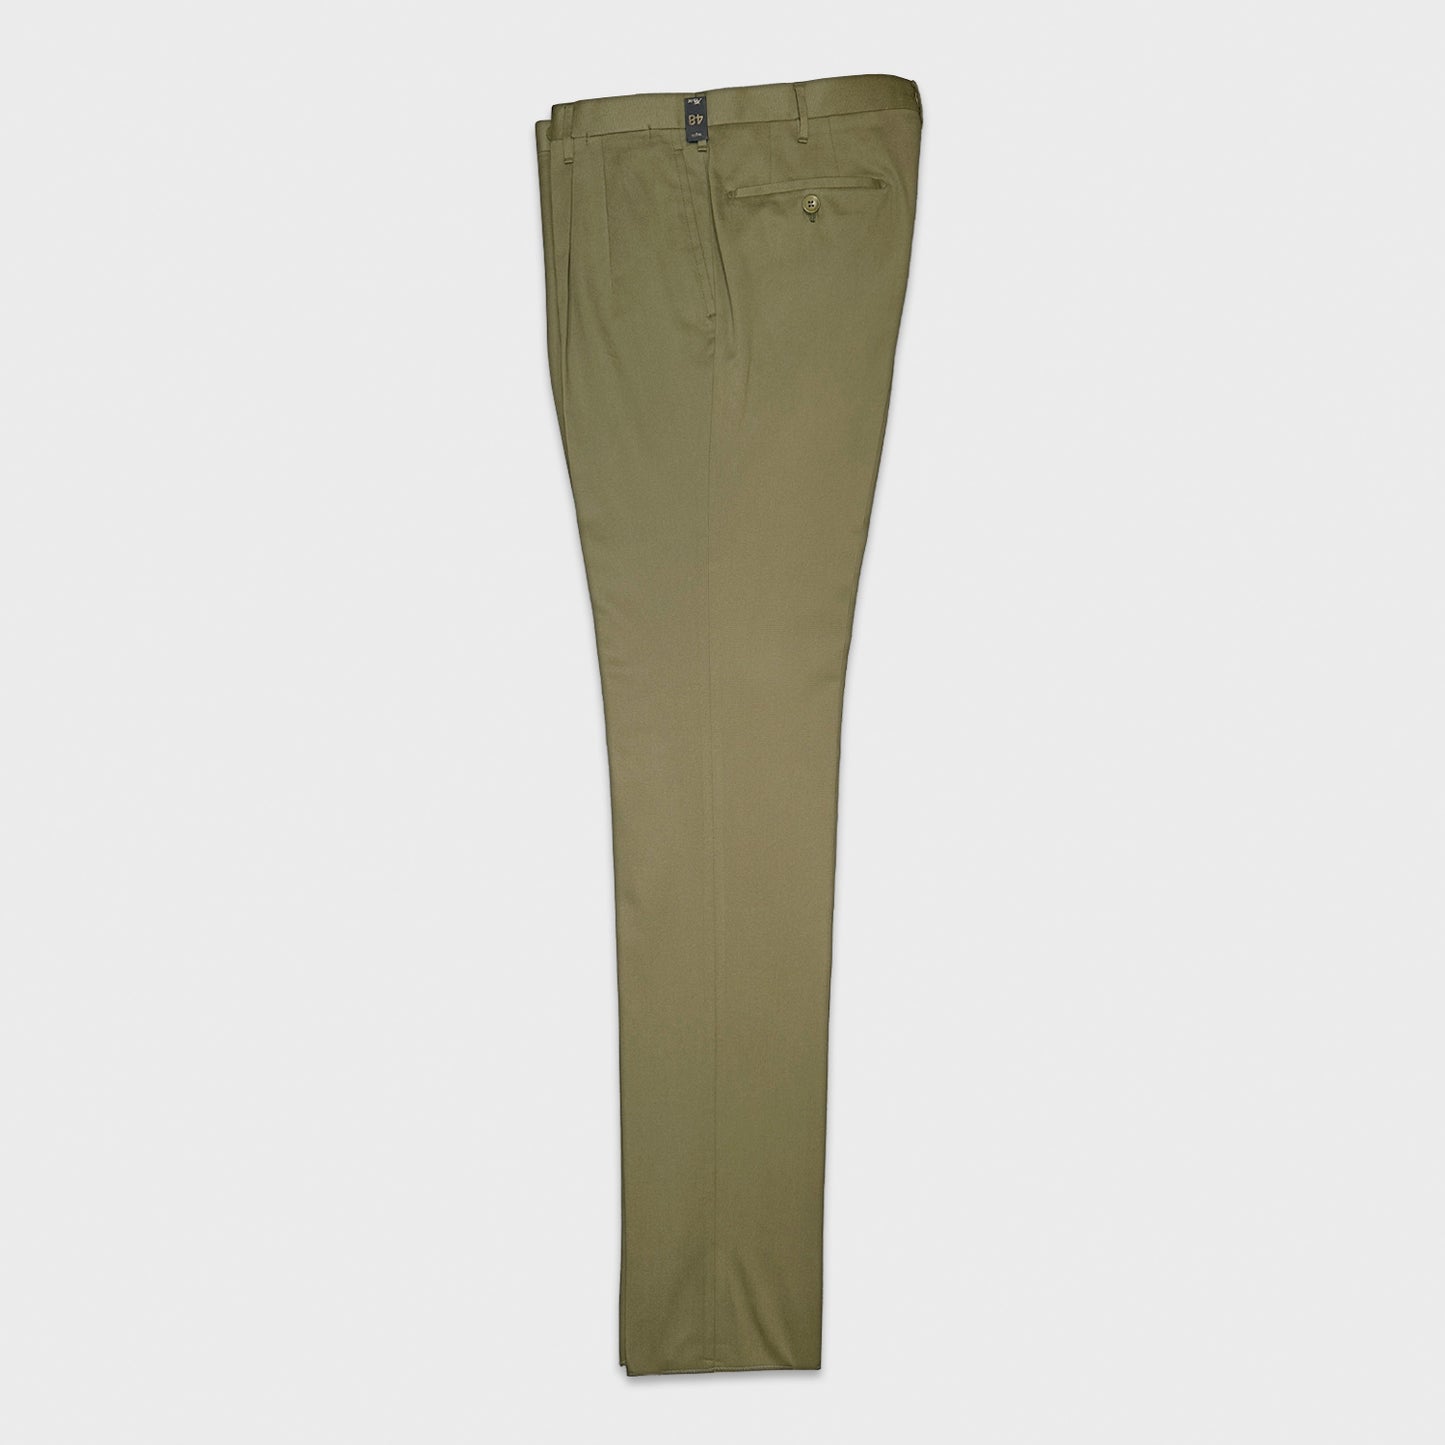 Load image into Gallery viewer, Tailored cotton trousers double pleats army green color, handmade in Italy by Rota Pantaloni, made with luxury cotton twill British fabric made by Brisbane Moss, high rise classic fit, four pockets
